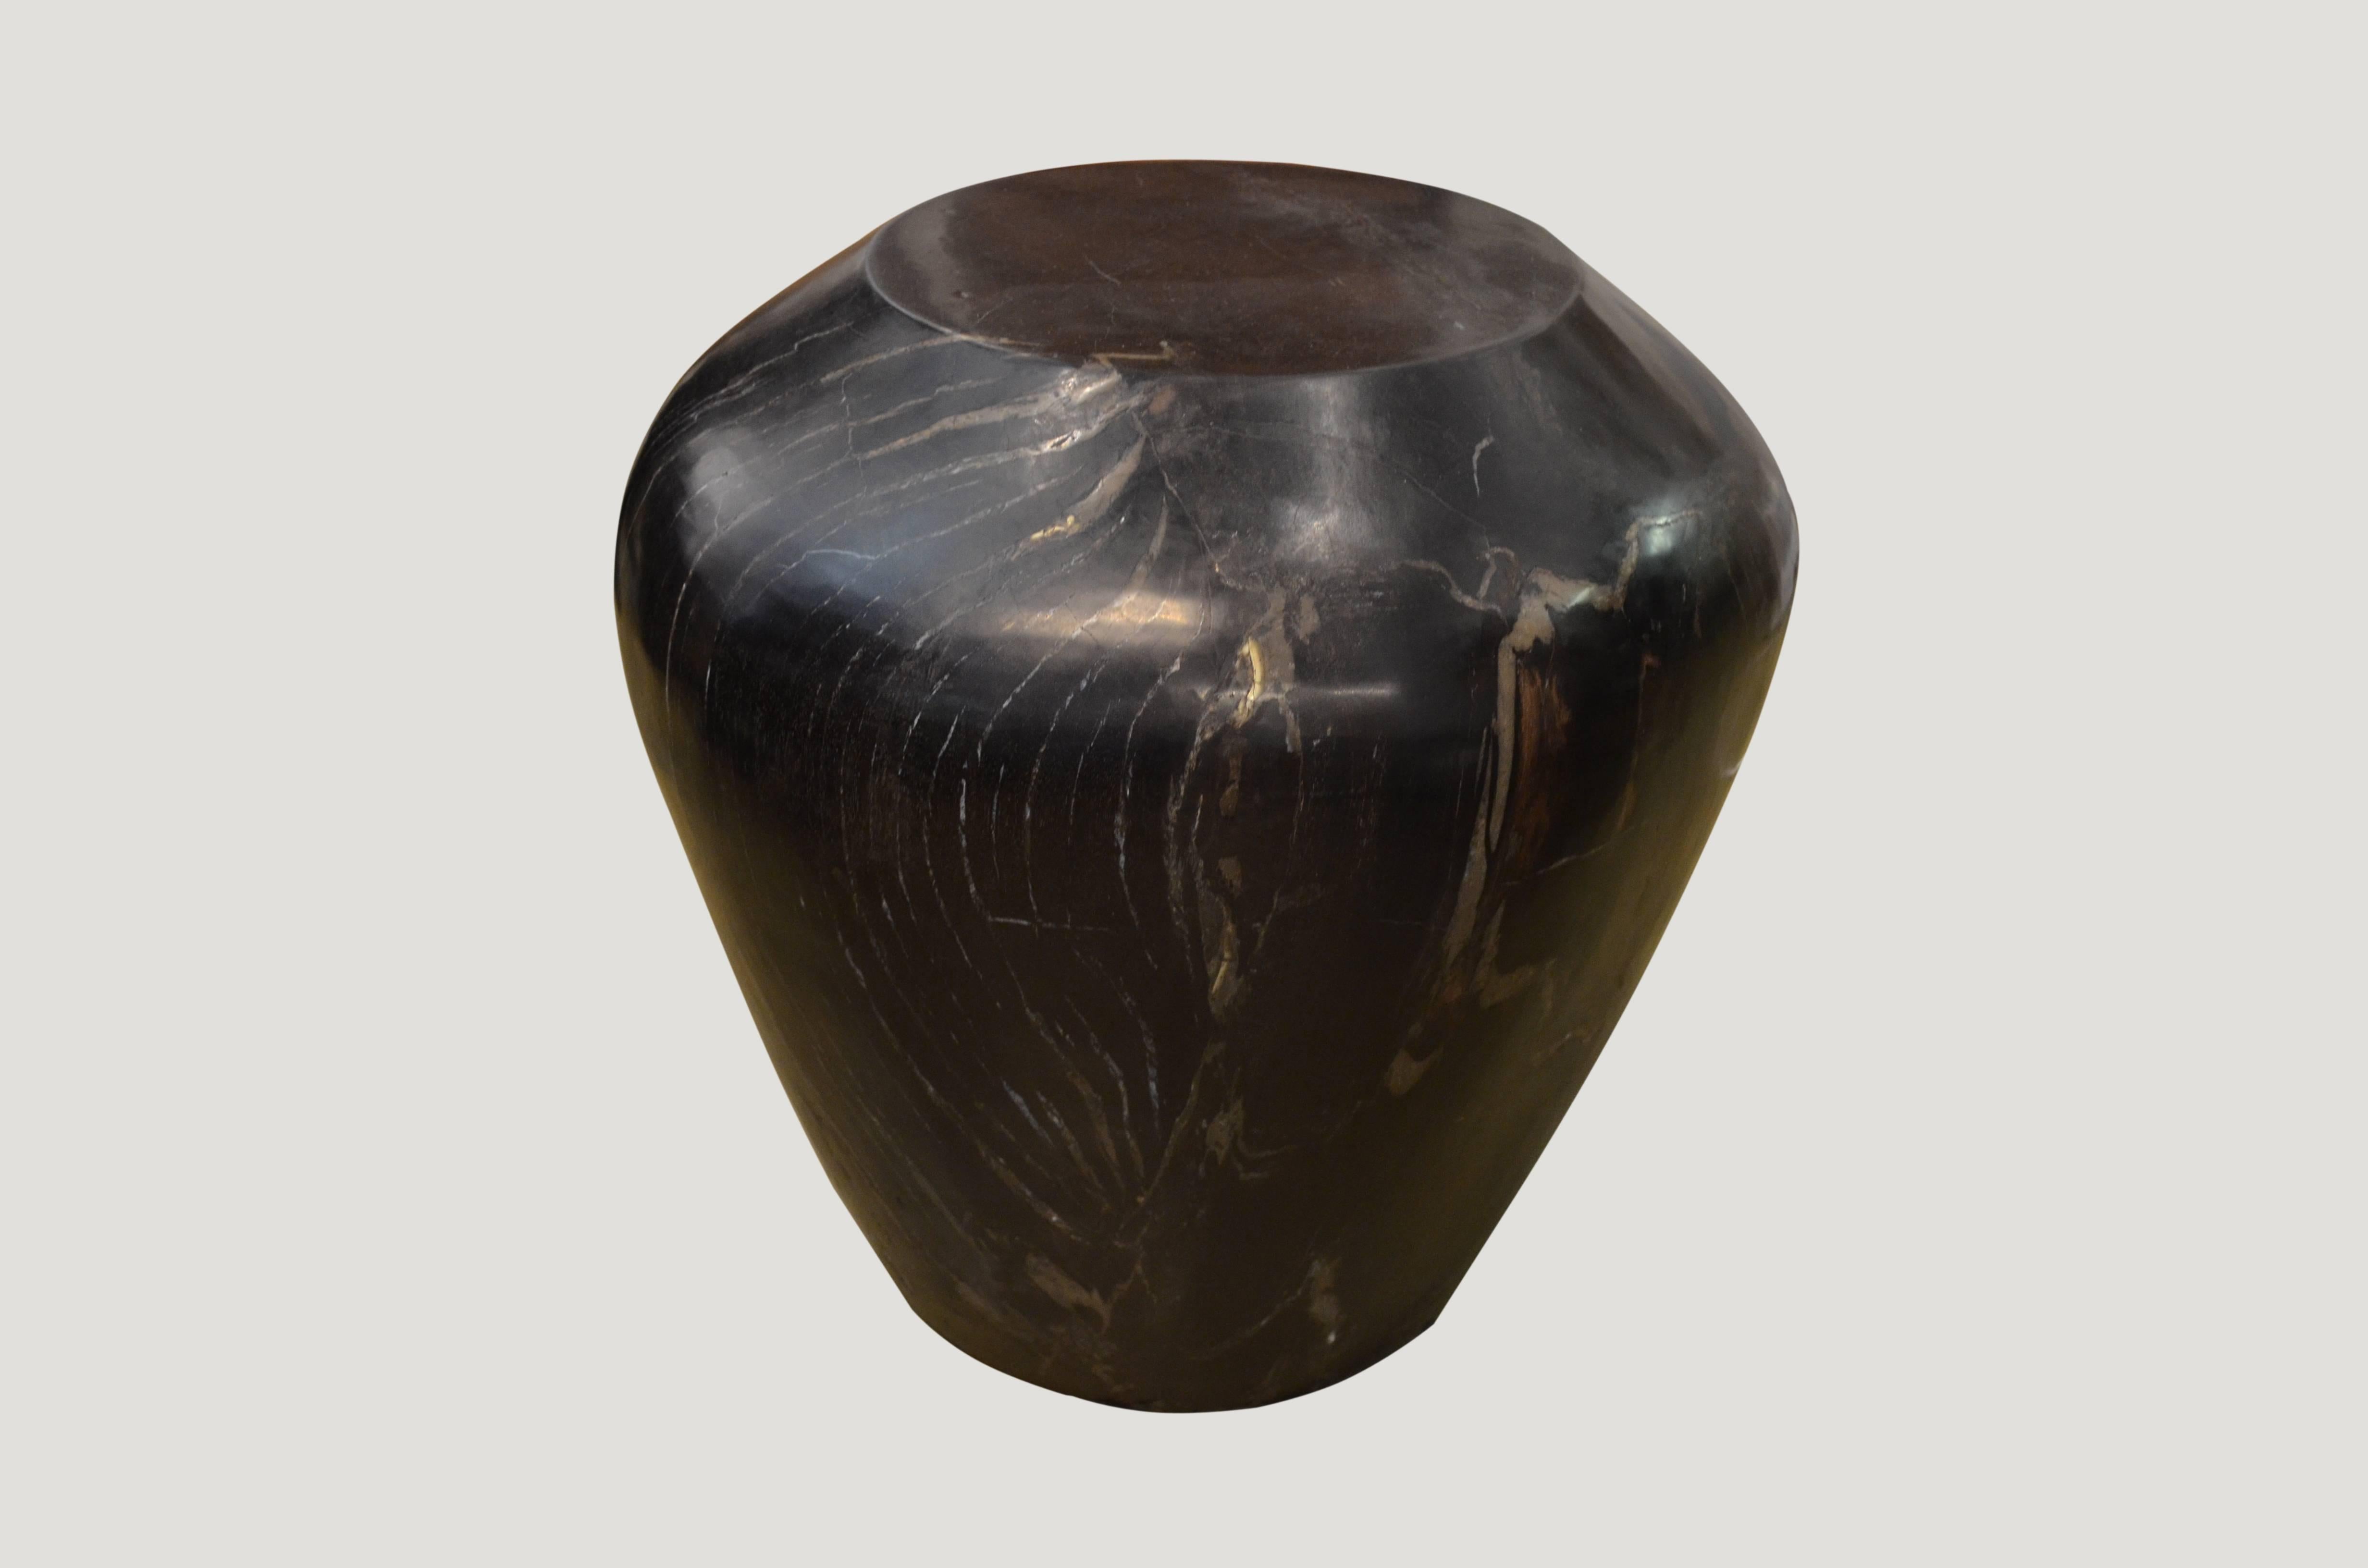 Super smooth carved petrified wood drum shape side table. We only select the best.

We source the highest quality petrified wood available. Each piece is hand selected and highly polished with minimal cracks. Petrified wood is extremely versatile